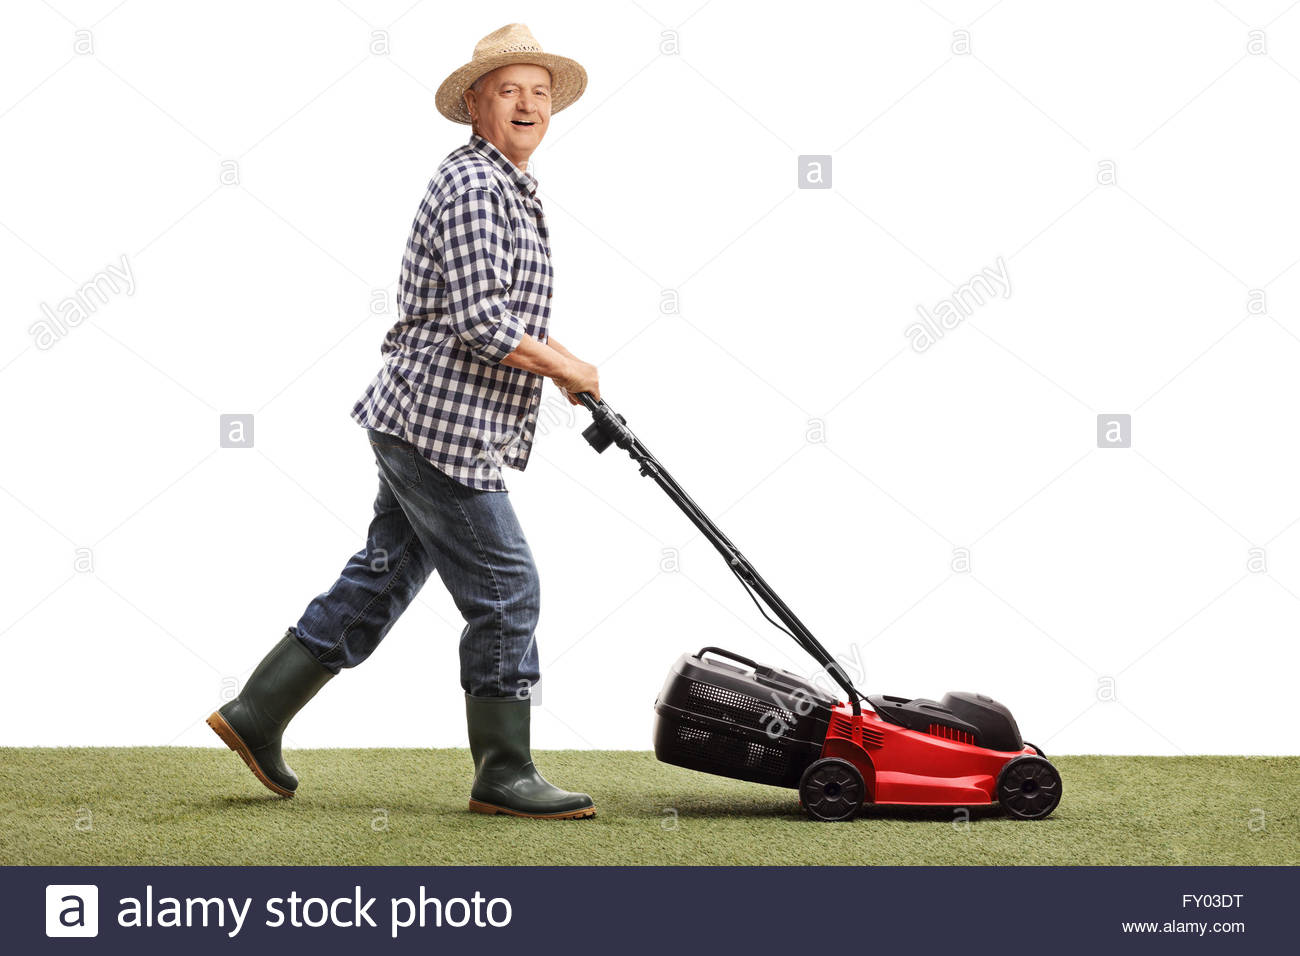 Profile Shot Of A Mature Man Mowing Lawn With Lawnmower